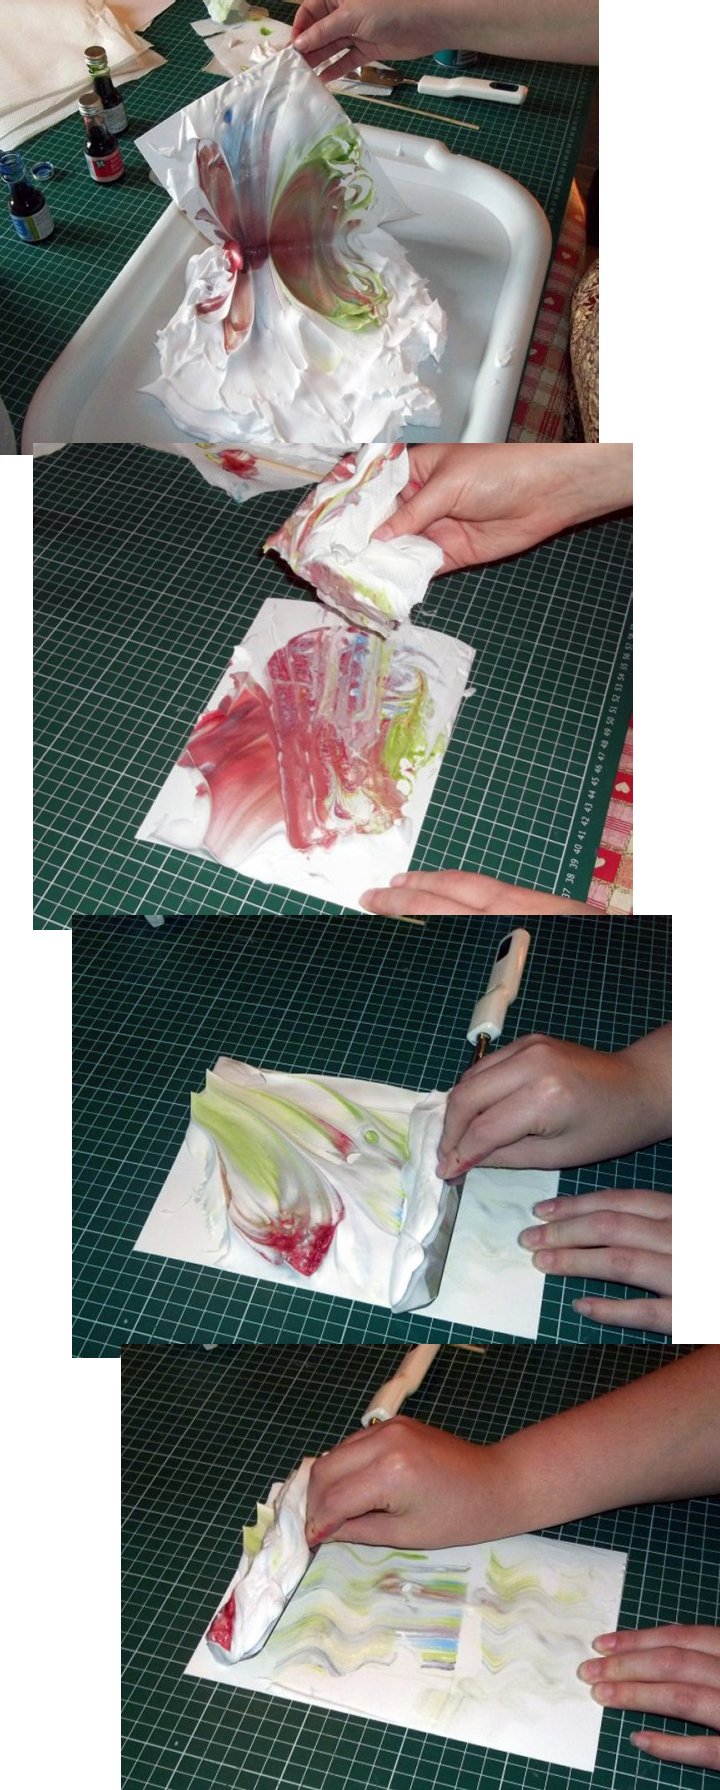 Things to make and do - Marbling with Shaving Foam